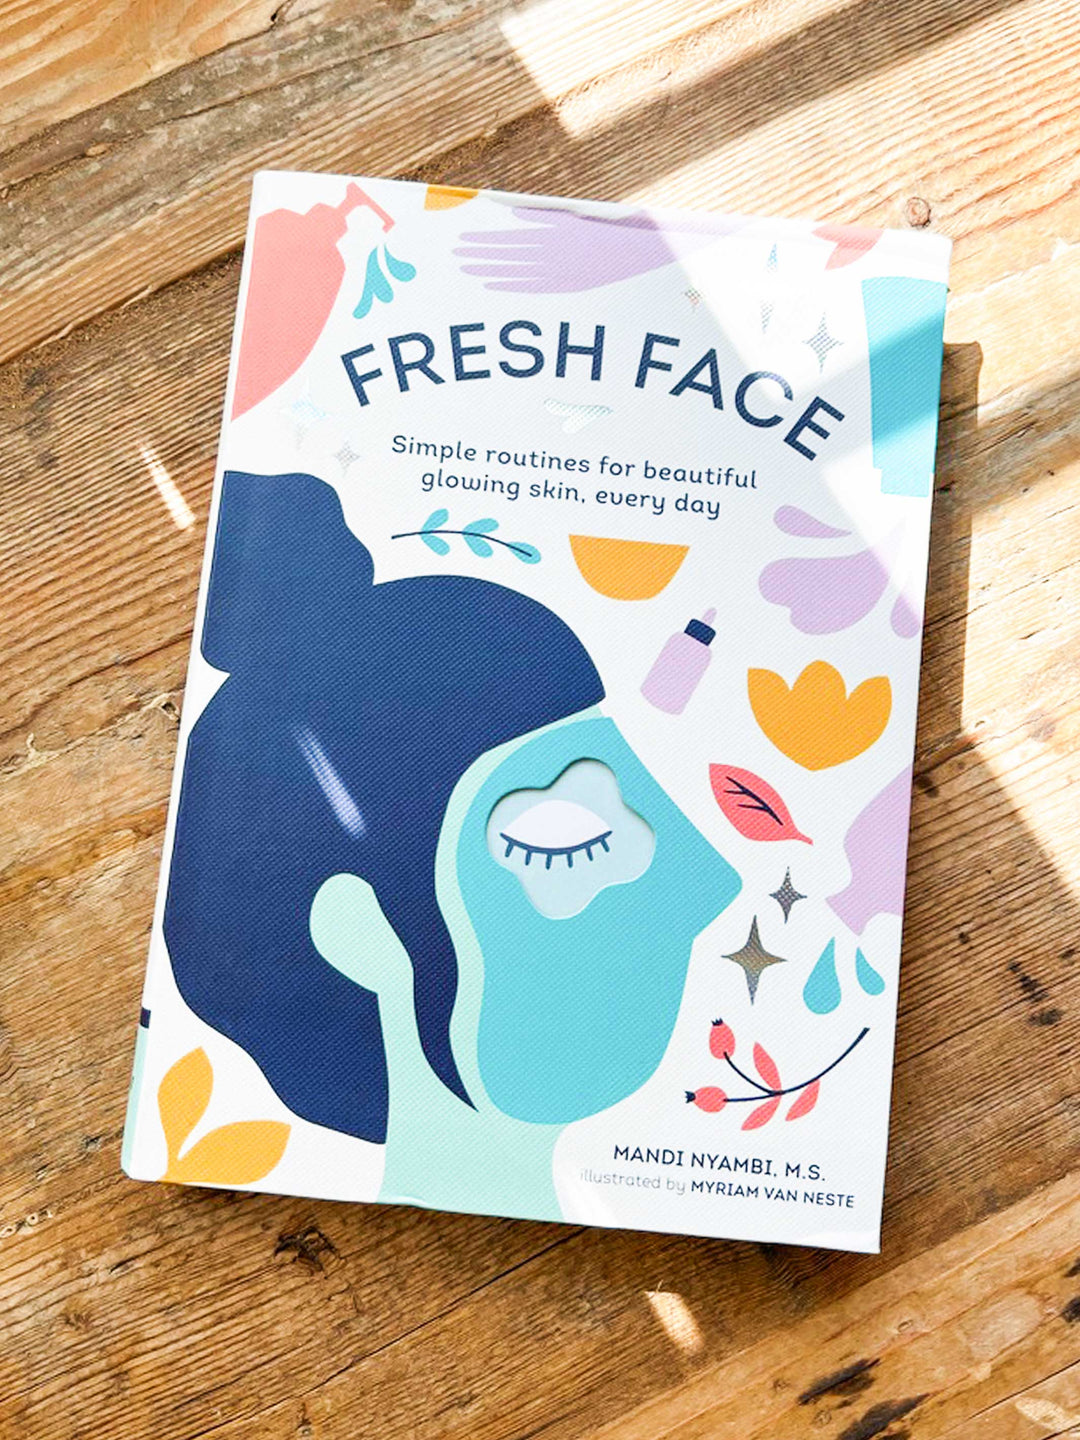 Cinnamongirl.com book Fresh Face - Simple routines for beautiful glowing skin, every day